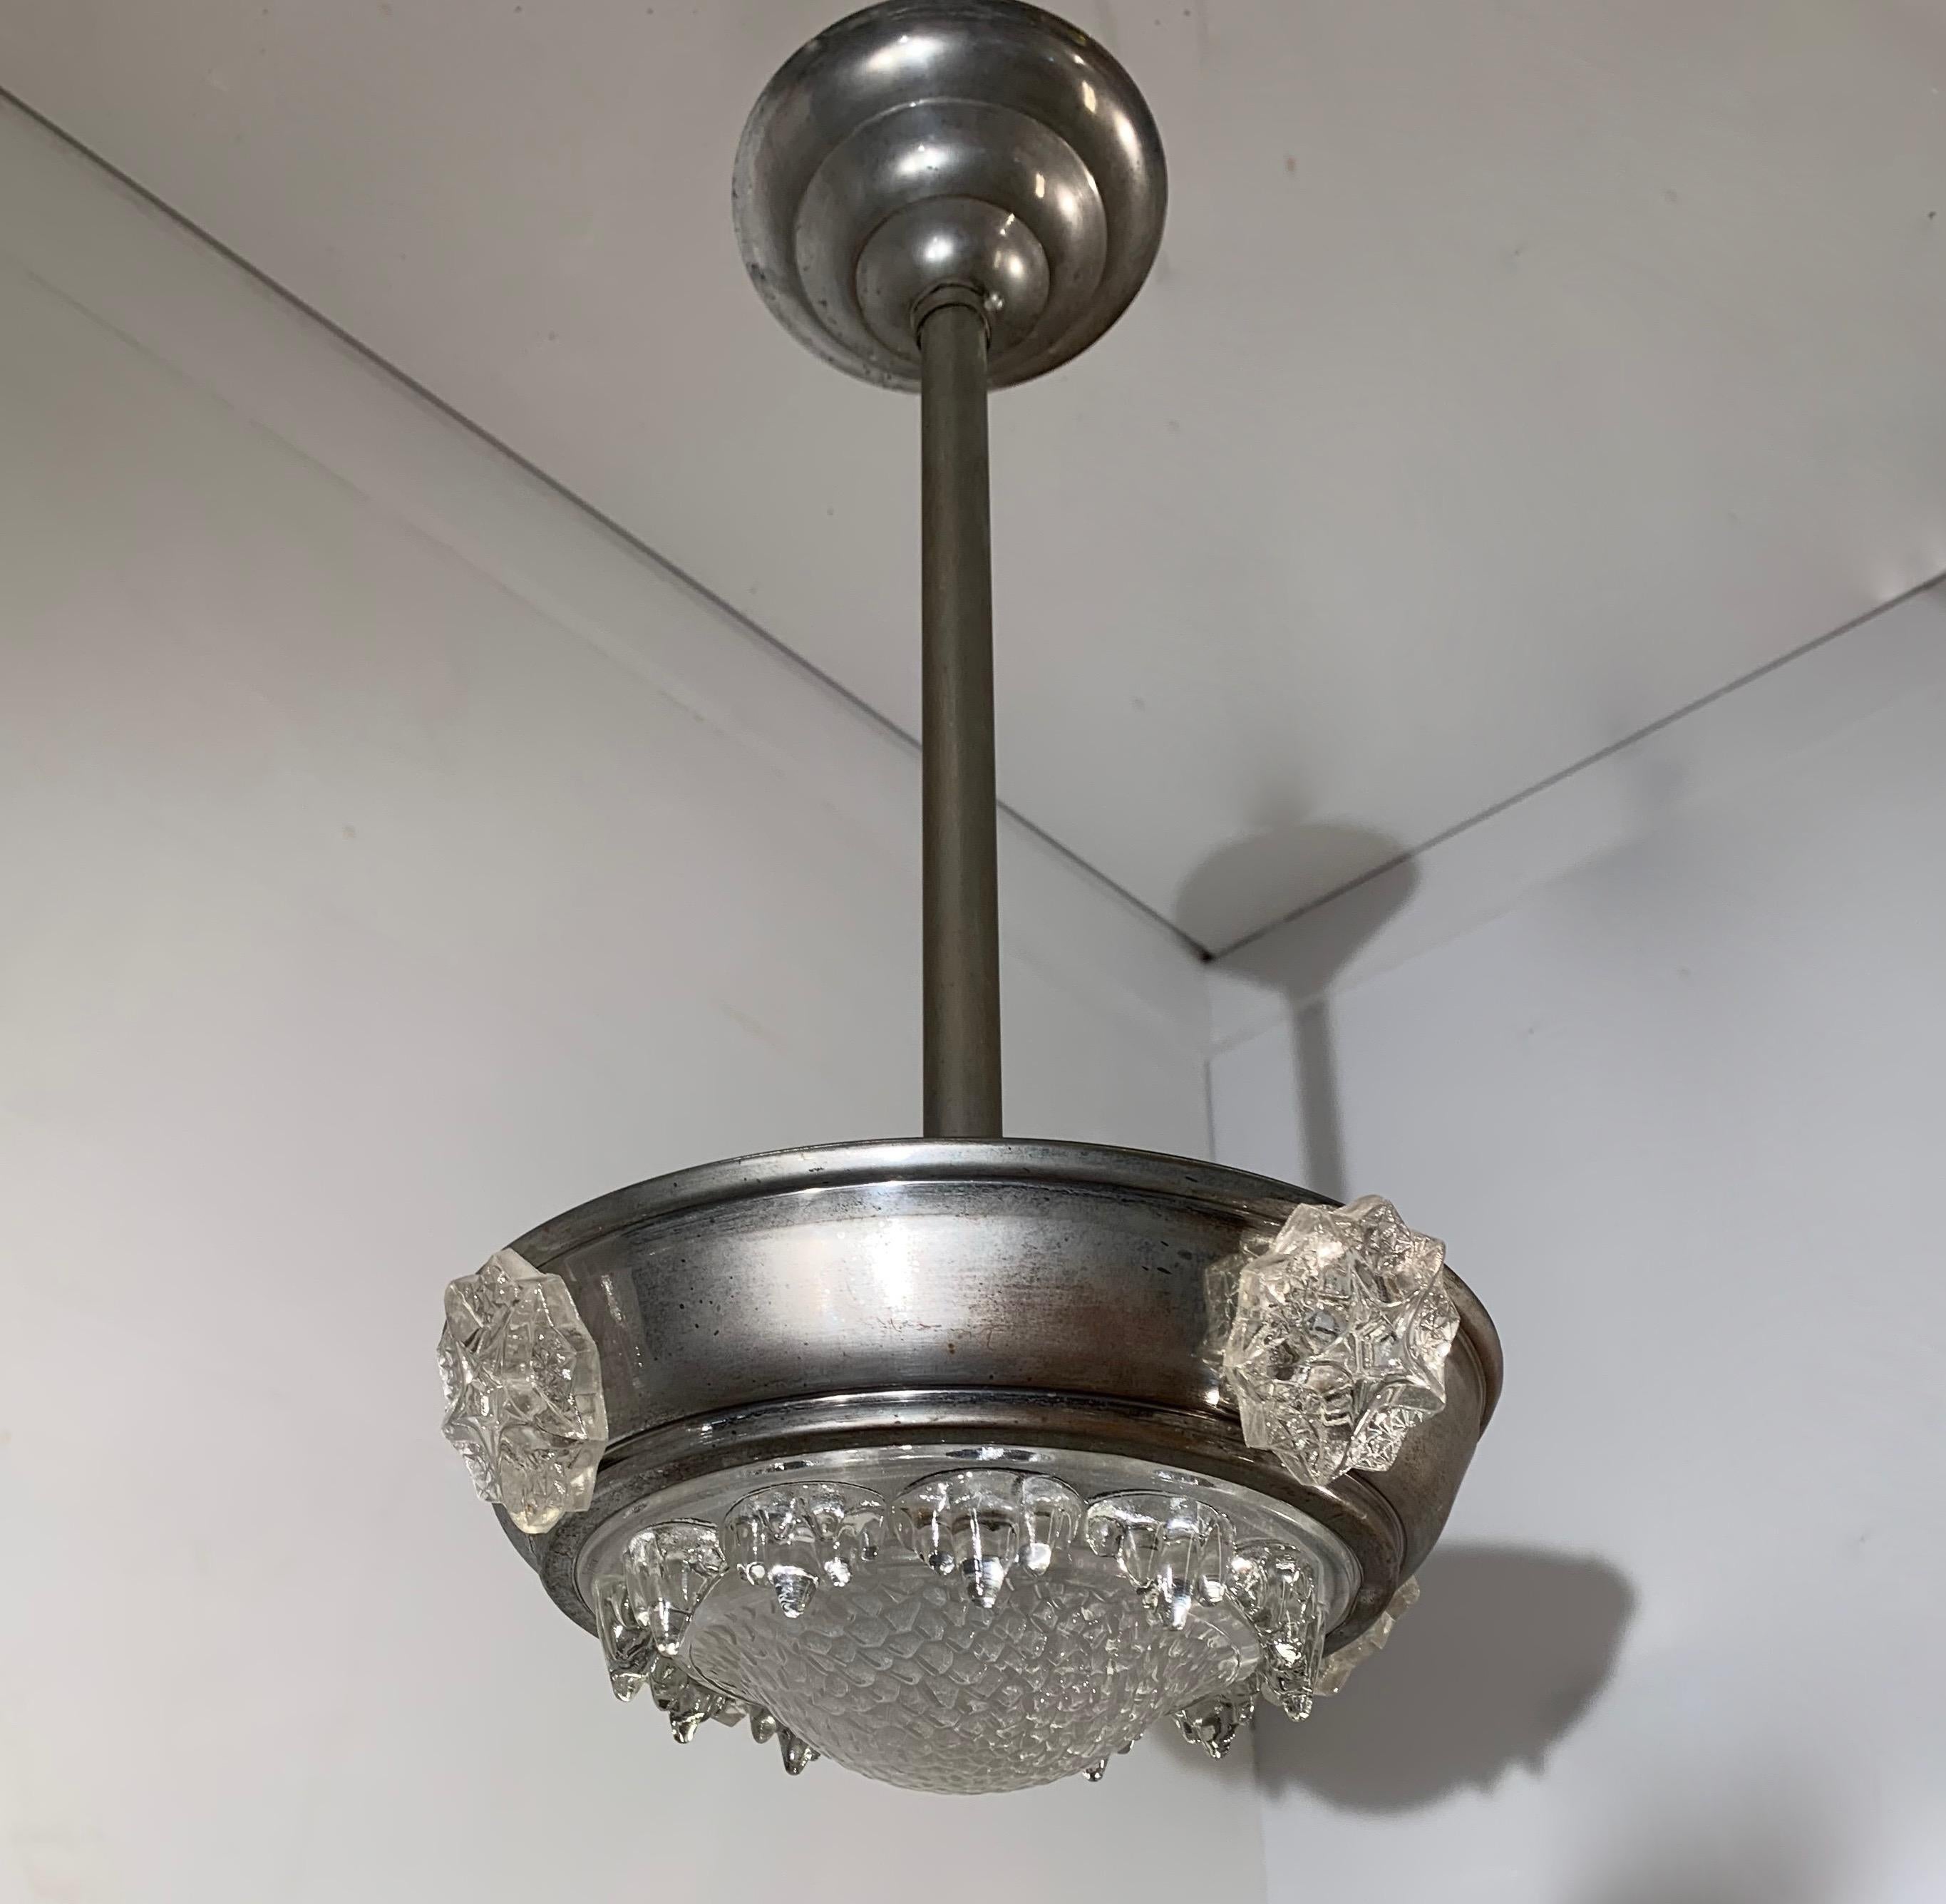 Delightful Art Deco Metal and Glass Pendant Light, Fixture by Ezan France In Good Condition For Sale In Lisse, NL